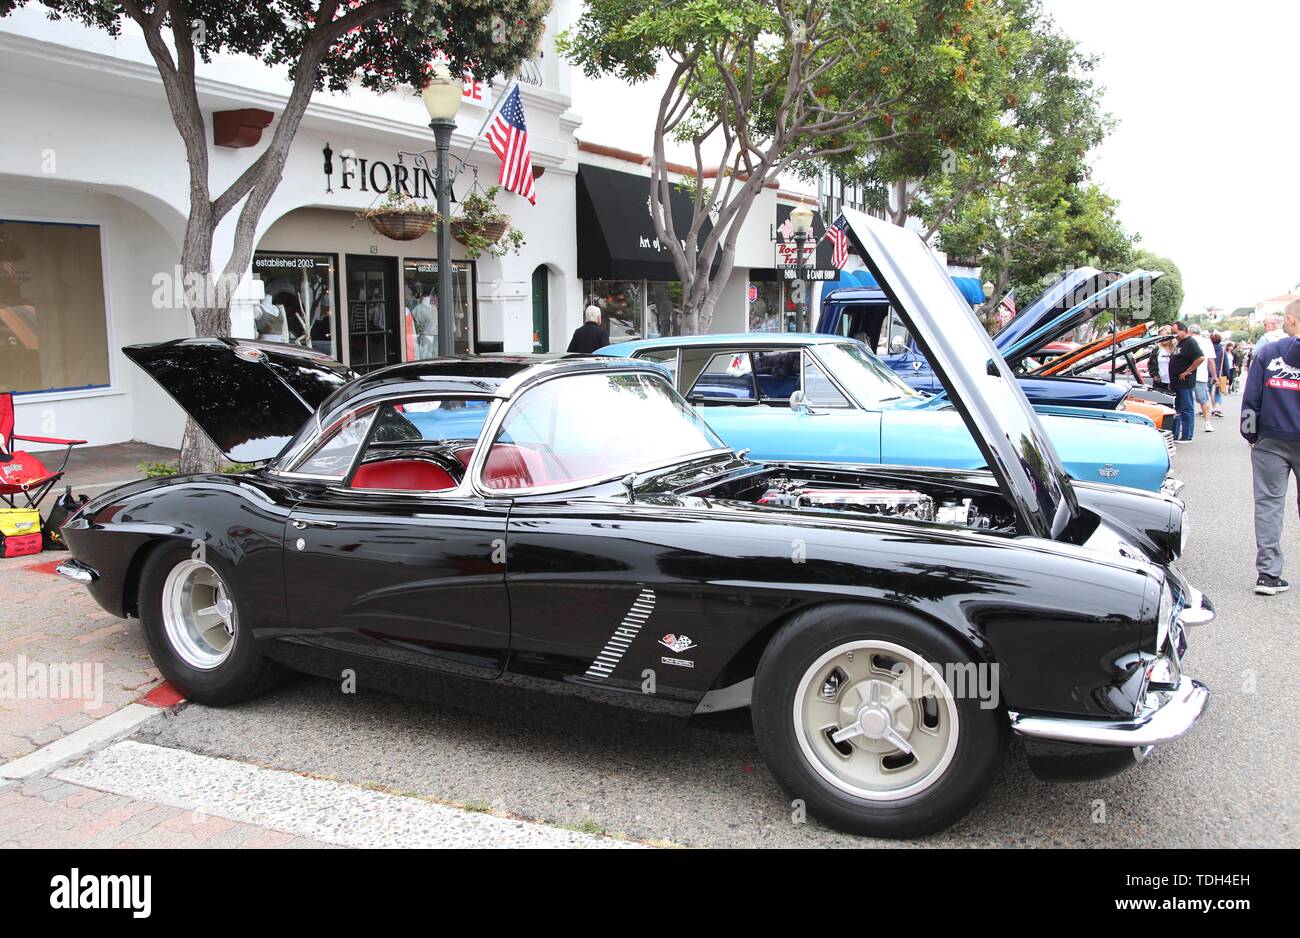 San Clemente, California, USA. 15th June, 2019. The San Clemente Downtown Business Association is hosting their 24th Annual Car Show in downtown San Clemente on Del Mar street. The show boasts hundreds of quality show cars from classic too exotic. Pictured: 1962 Corvette Hardtop Roadster. Credit: Katrina Kochneva/ZUMA Wire/Alamy Live News Stock Photo